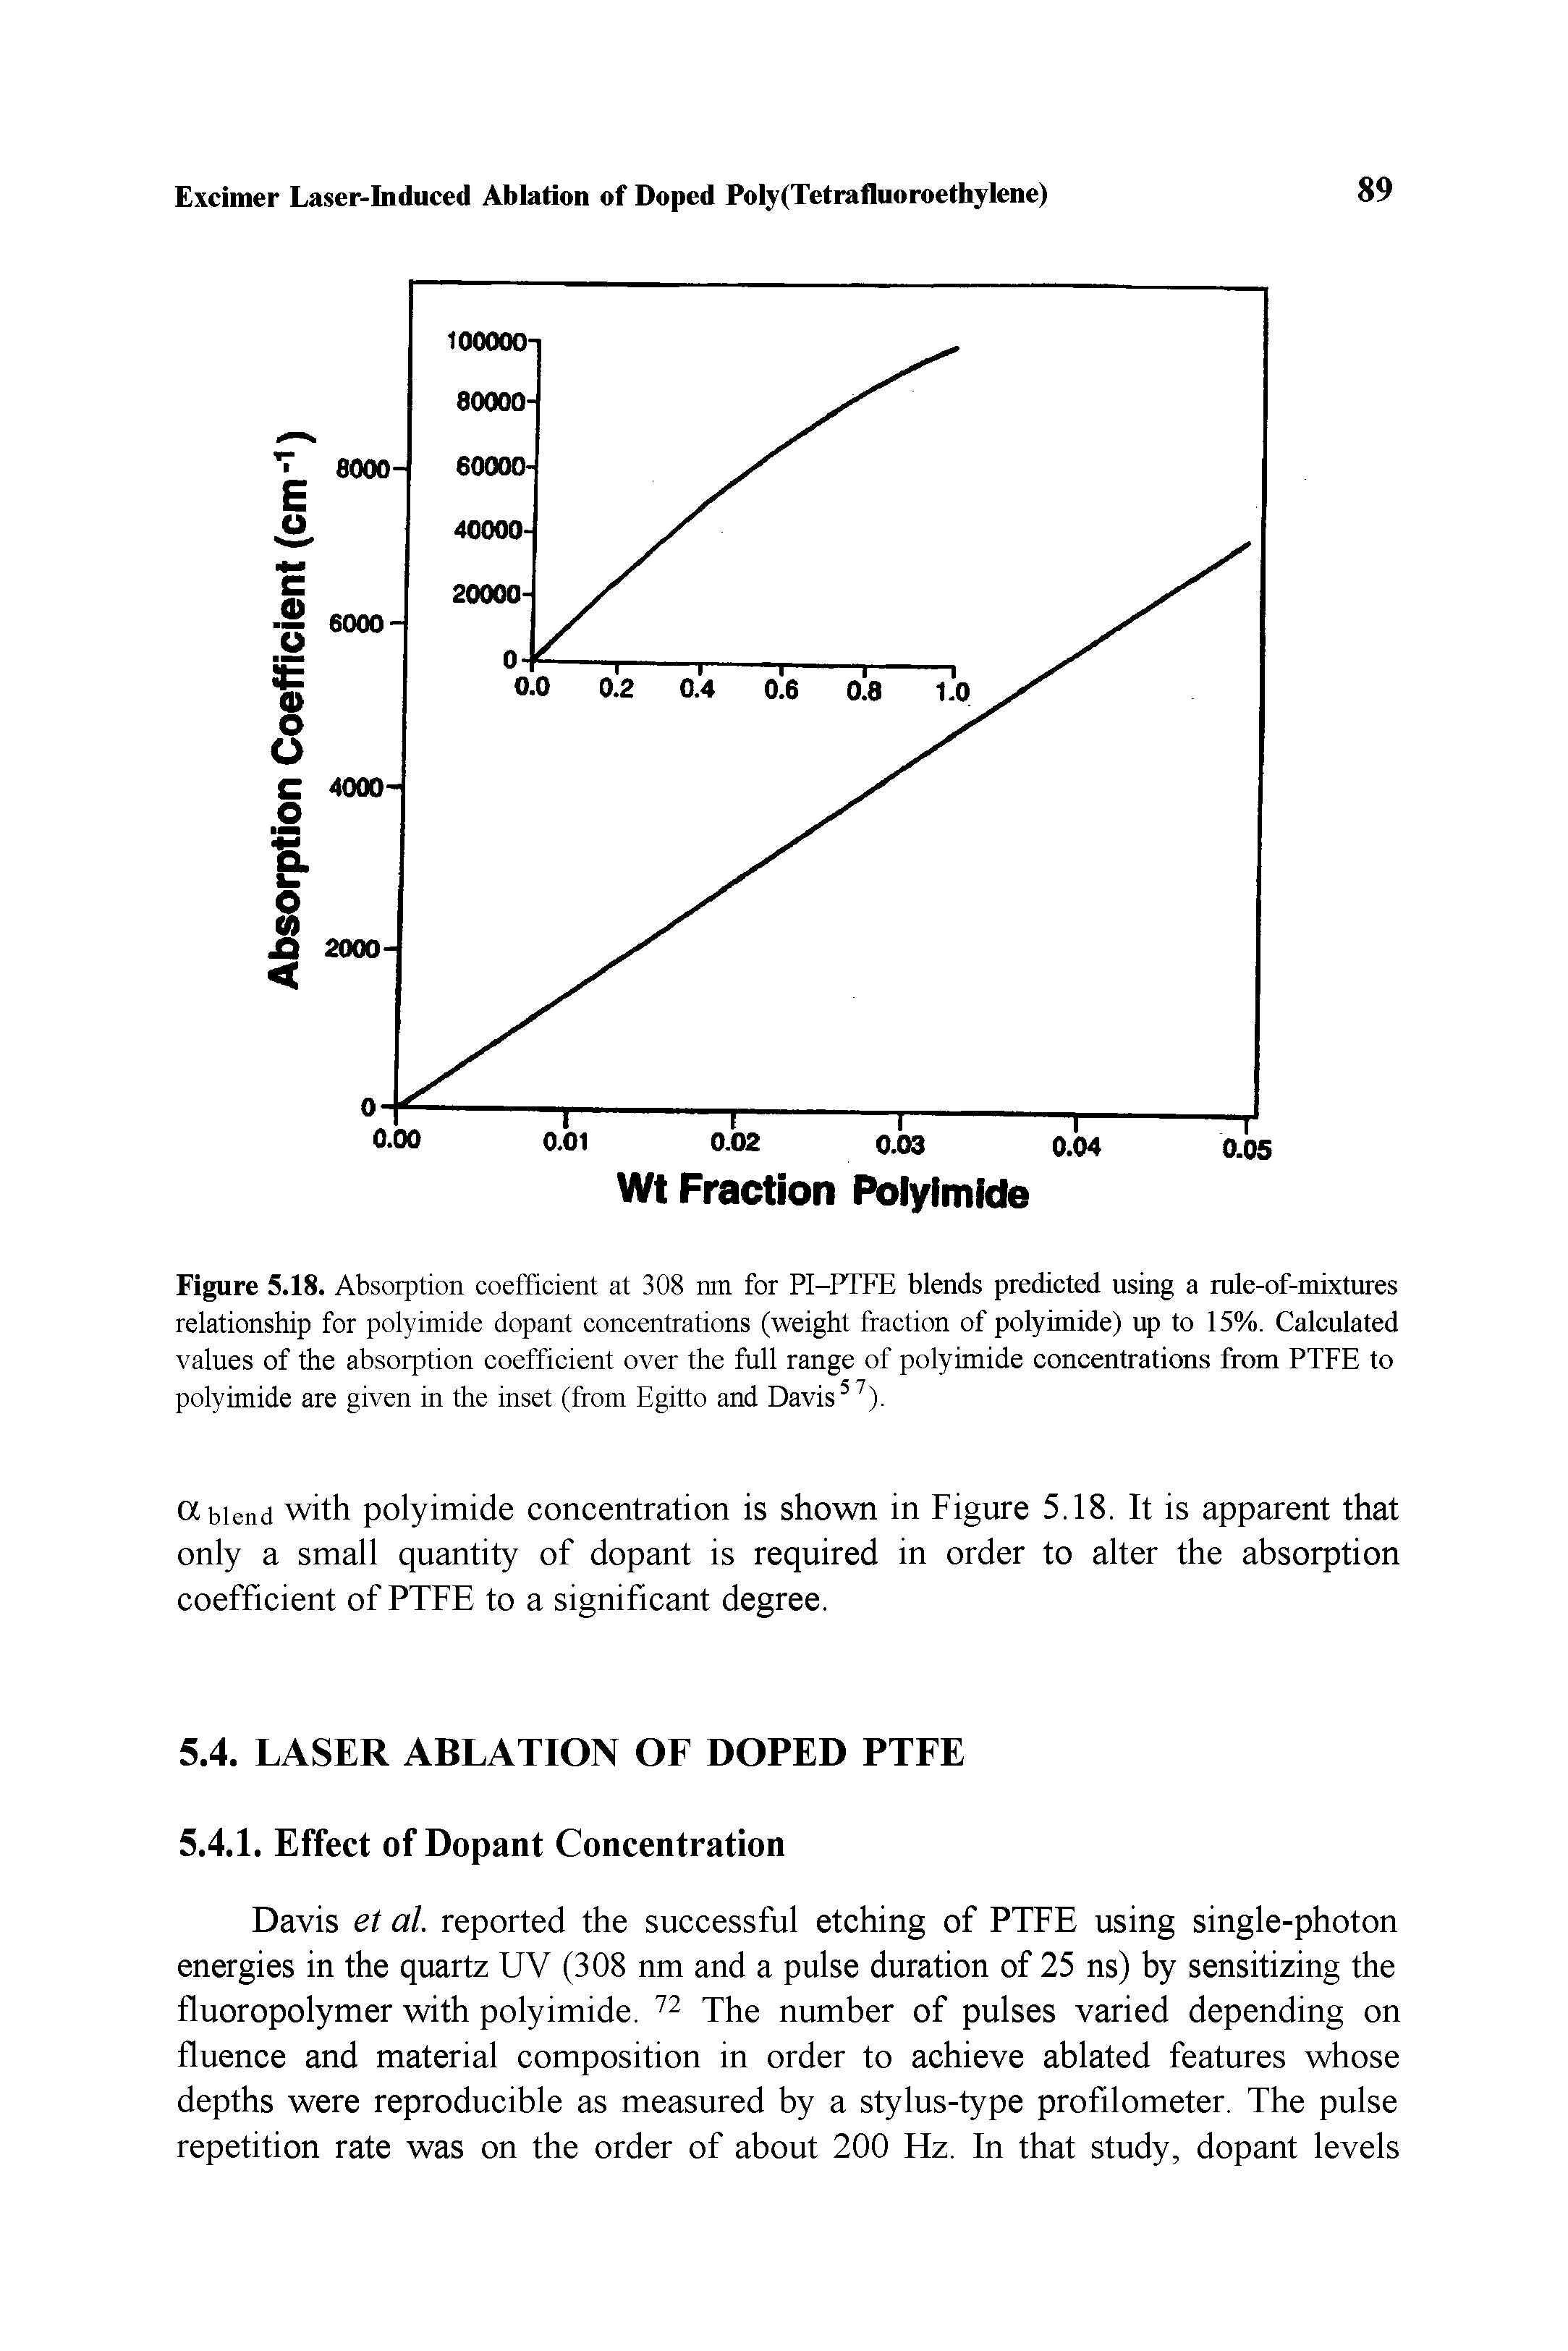 Figure 5.18. Absorption coefficient at 308 nm for PI-PTFE blends predicted using a rule-of-mixtures relationship for polyimide dopant concentrations (weight fraction of polyimide) up to 15%. Calculated values of the absorption coefficient over the full range of polyimide concentrations from PTFE to polyimide are given in the inset (from Egitto and Davis57).